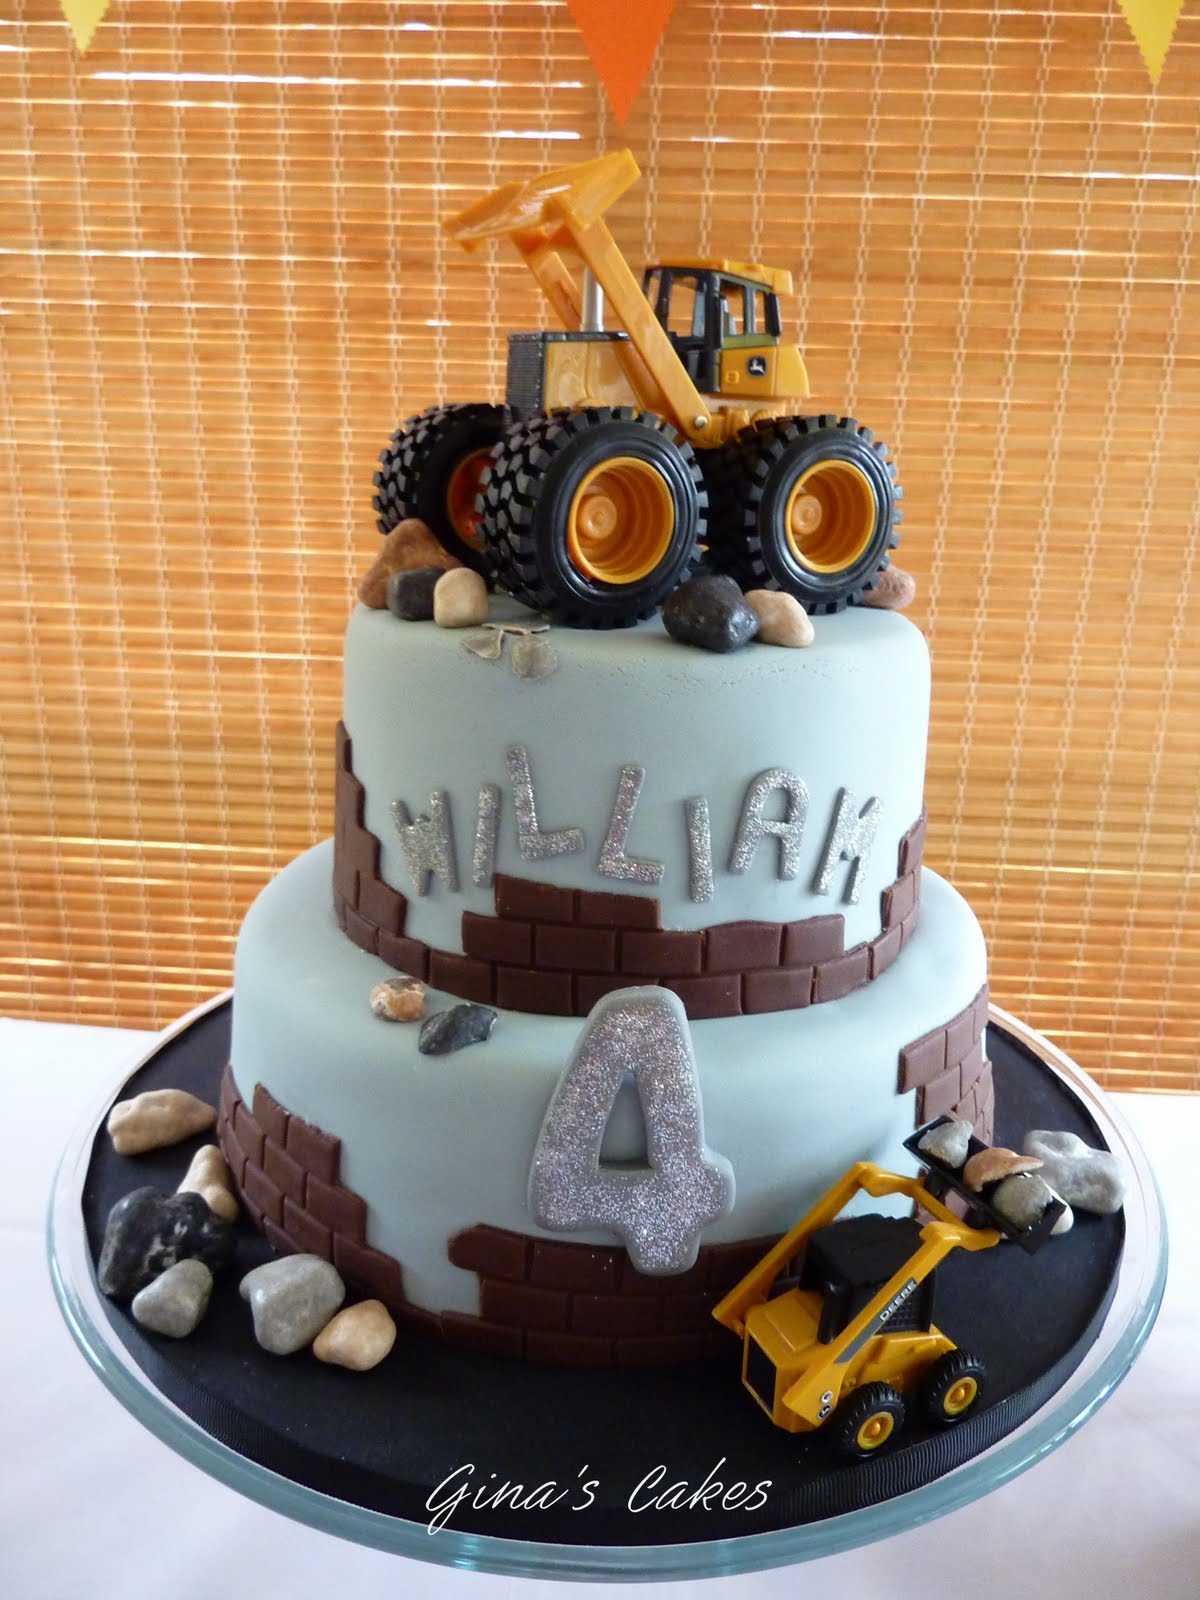 Construction Themed Cake